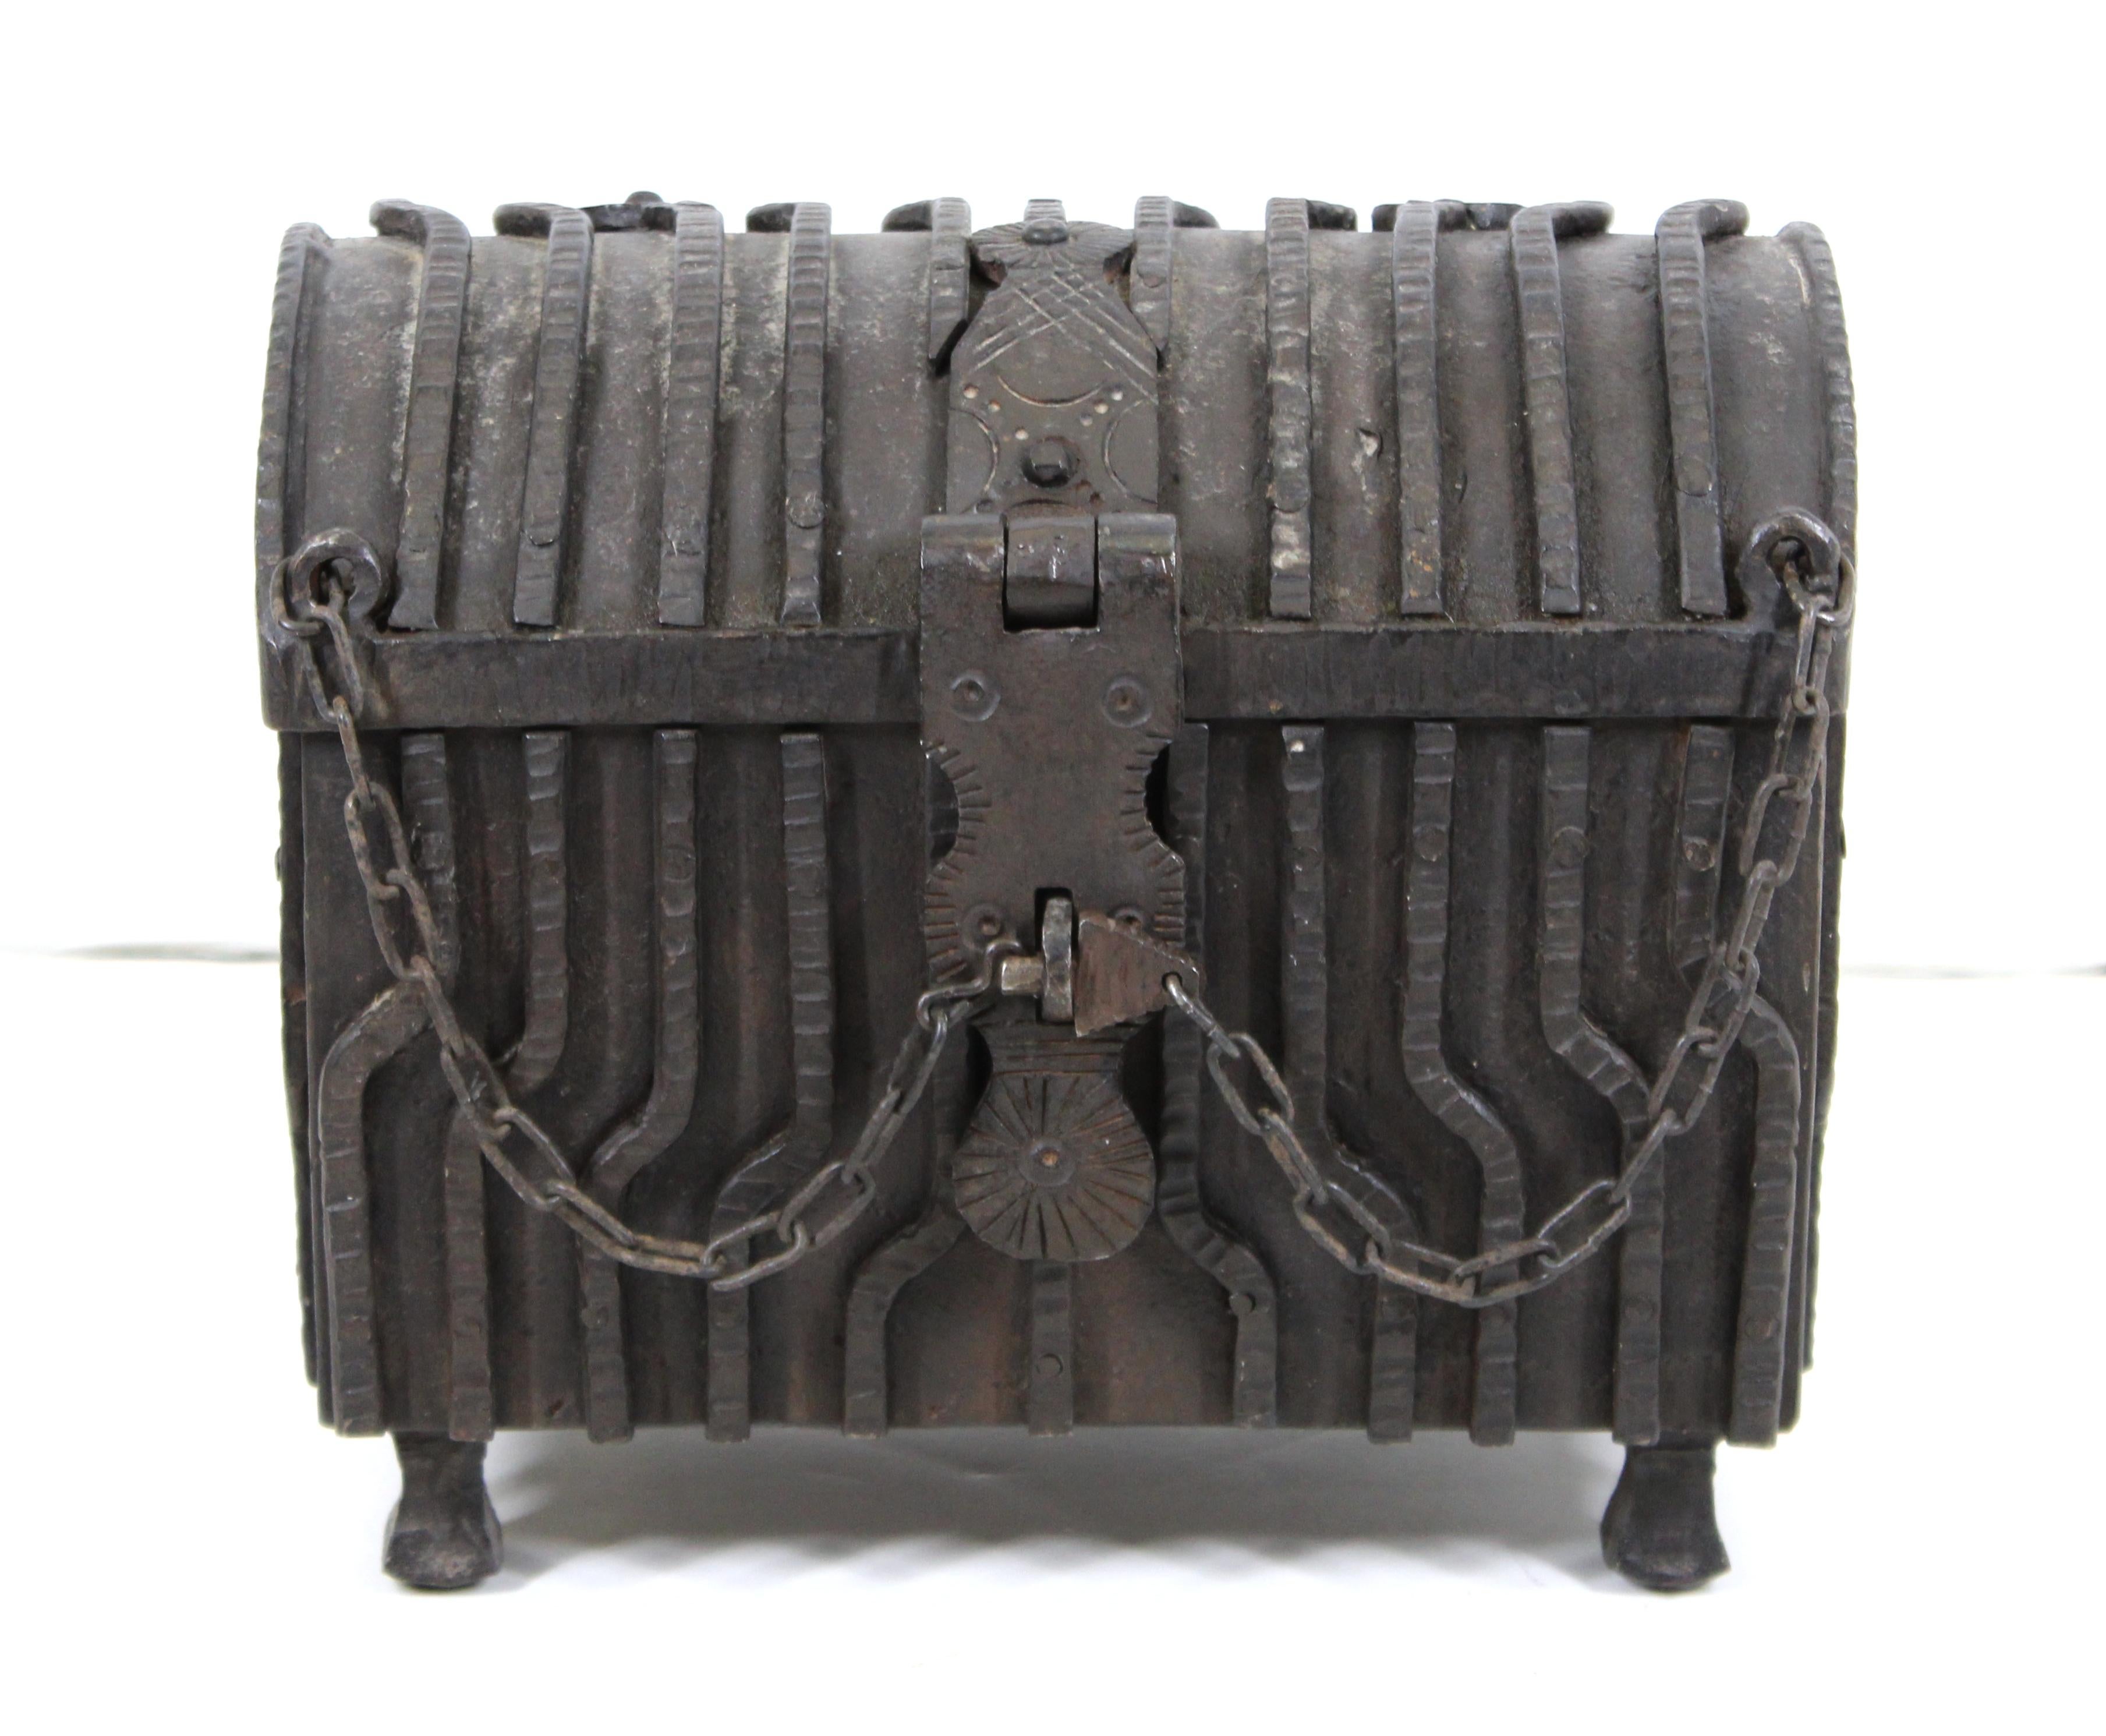 German Renaissance Revival period heavy wrought iron strong box with lock and chain closure. The piece is in a shape reminiscent of a treasure chest and has a red velvet interior. Made in Germany in the 1900s and is in great antique condition with